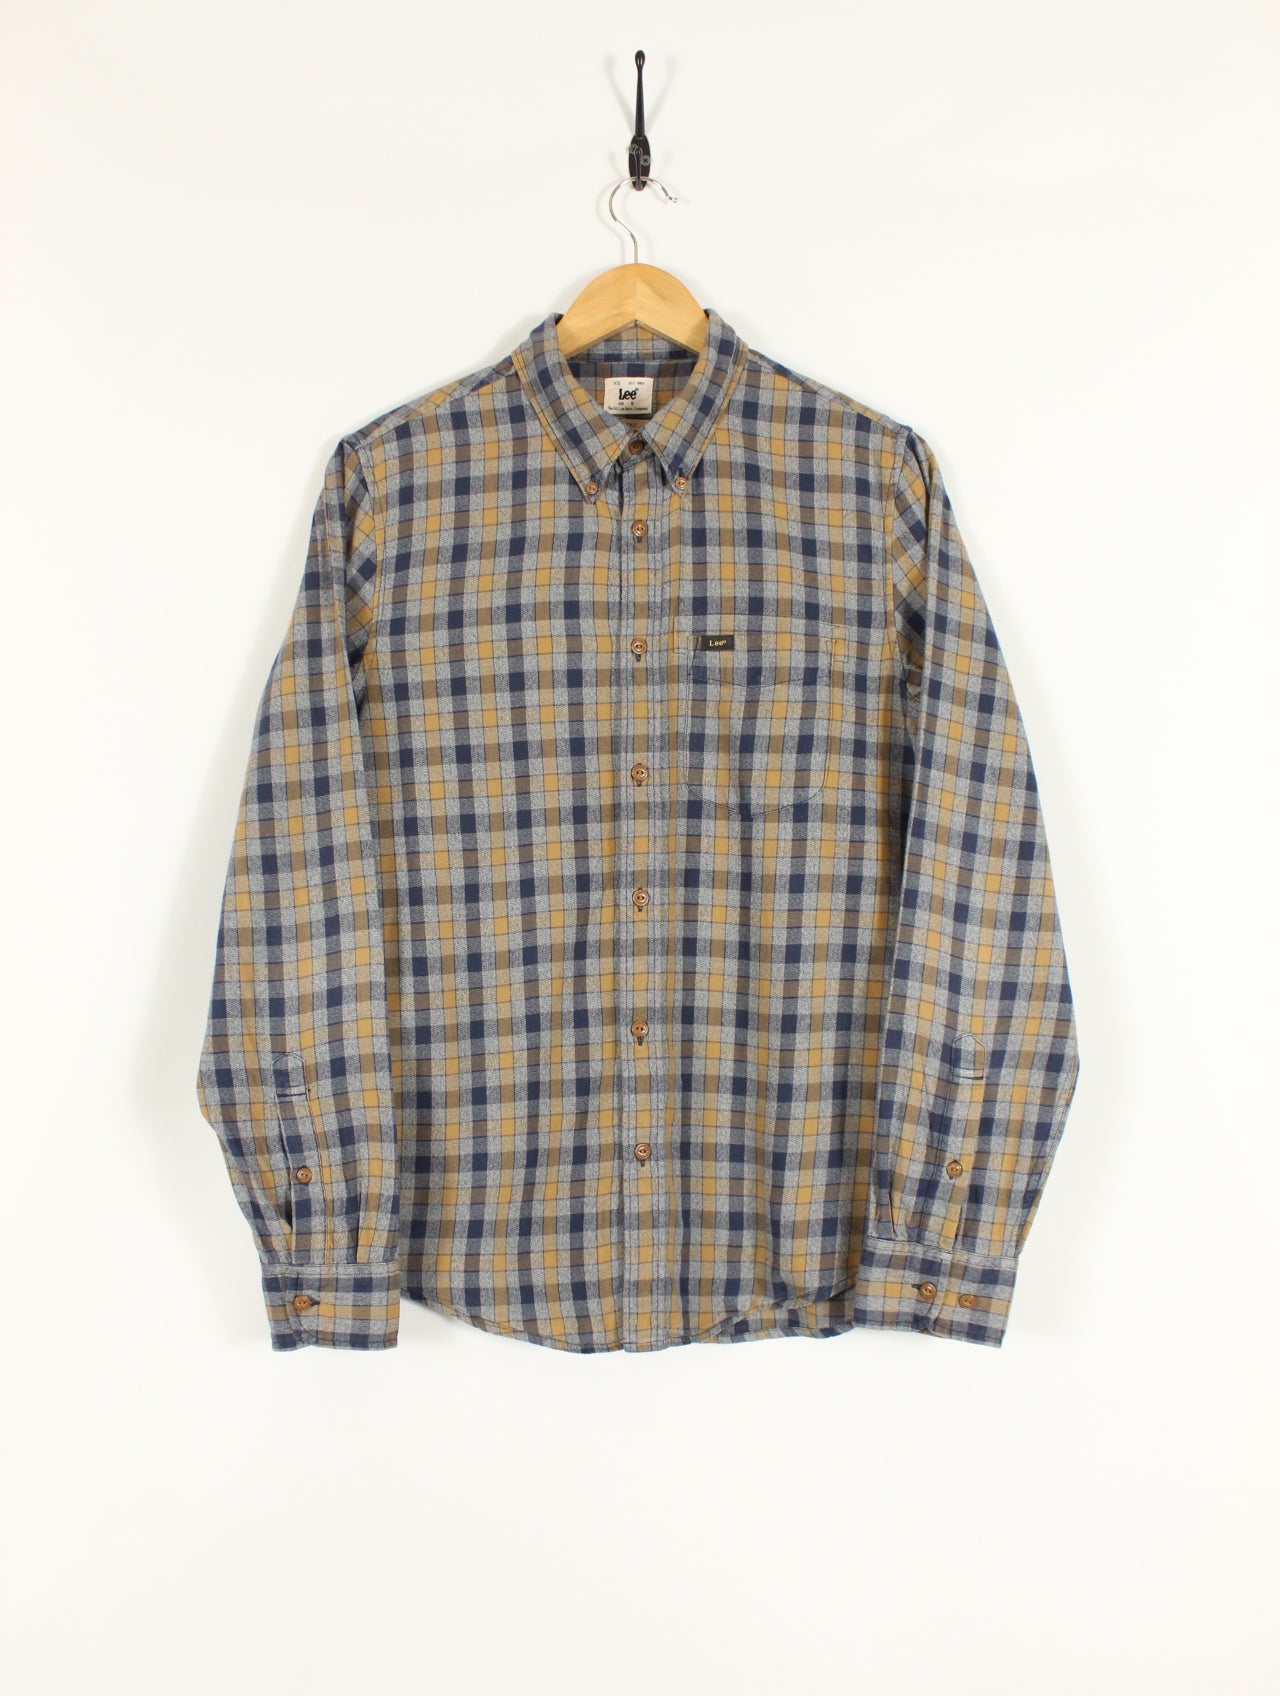 Lee Checked Shirt (S)